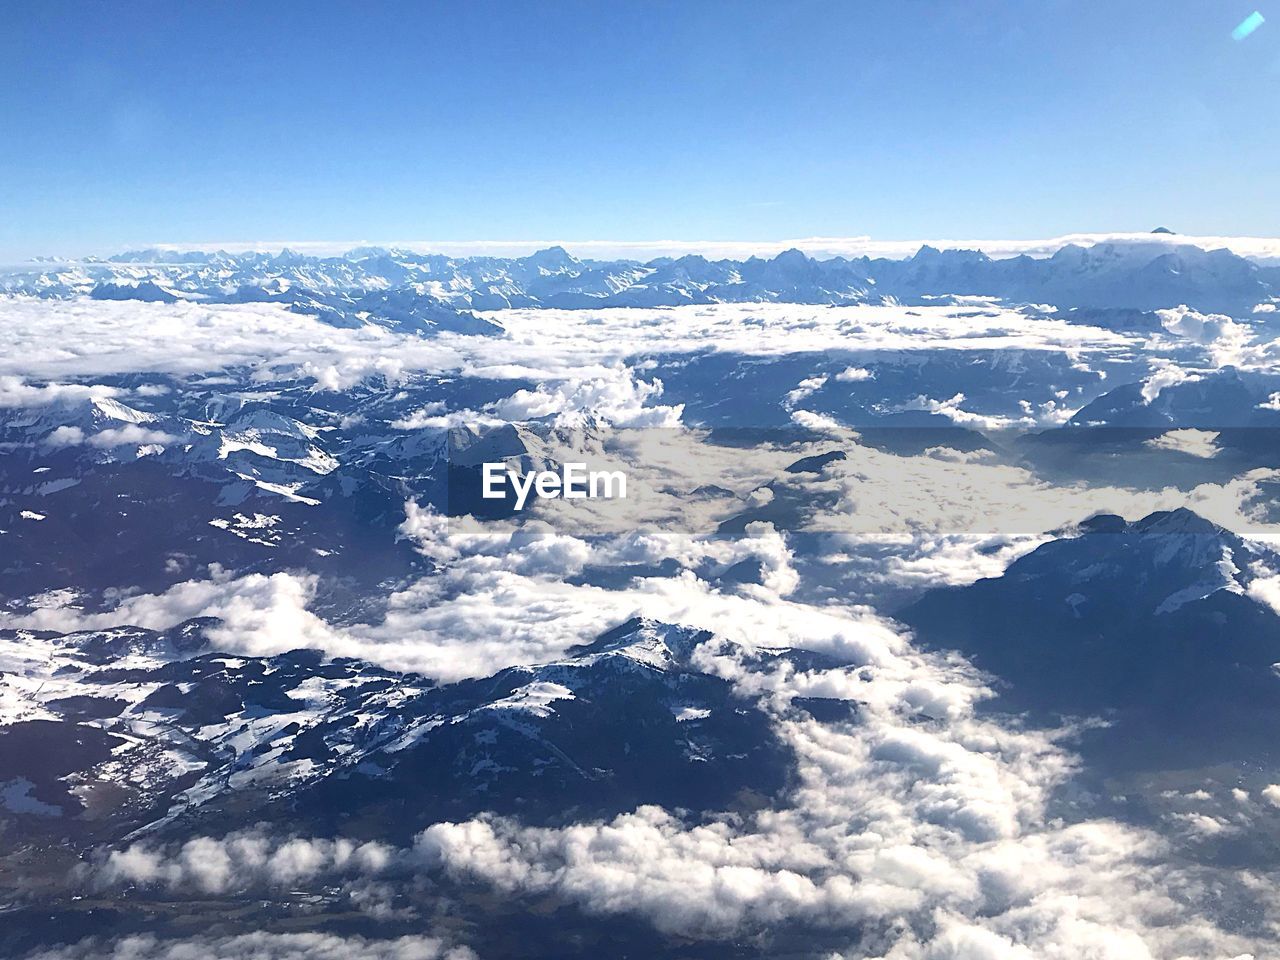 AERIAL VIEW OF SNOWCAPPED LANDSCAPE AGAINST BLUE SKY